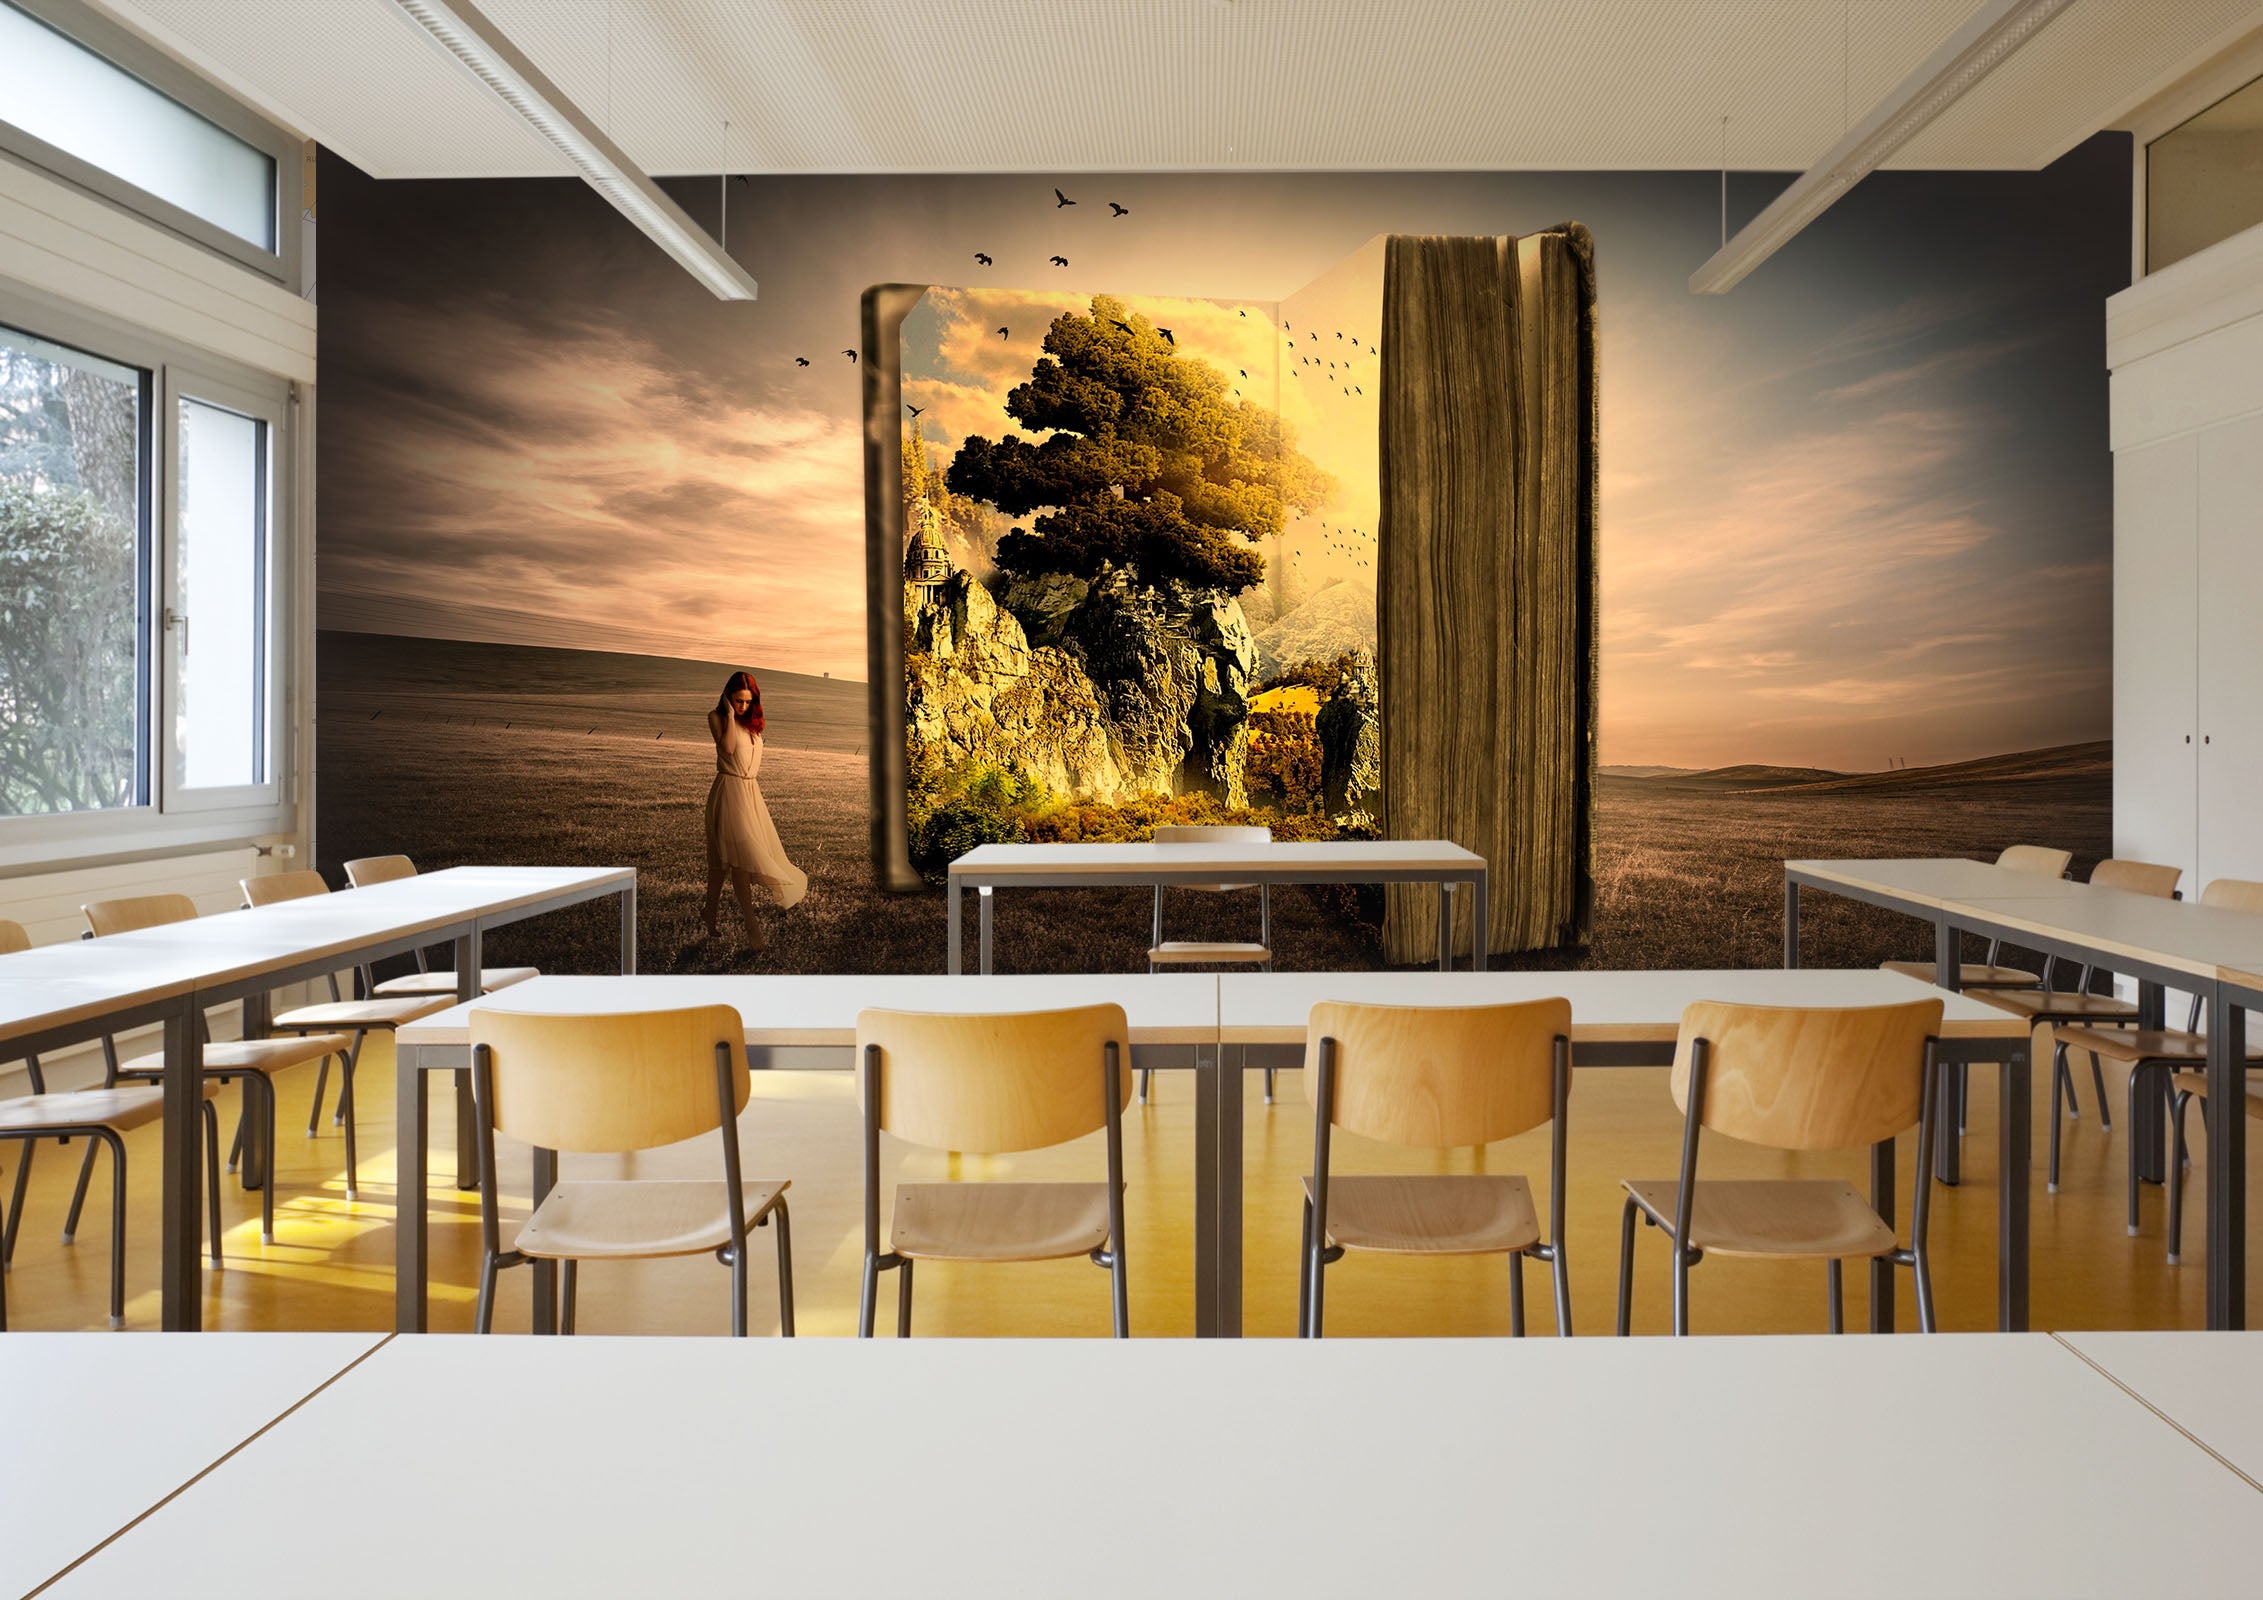 3D Mountain in the book with a girl 10 Wall Murals Wallpaper AJ Wallpaper 2 